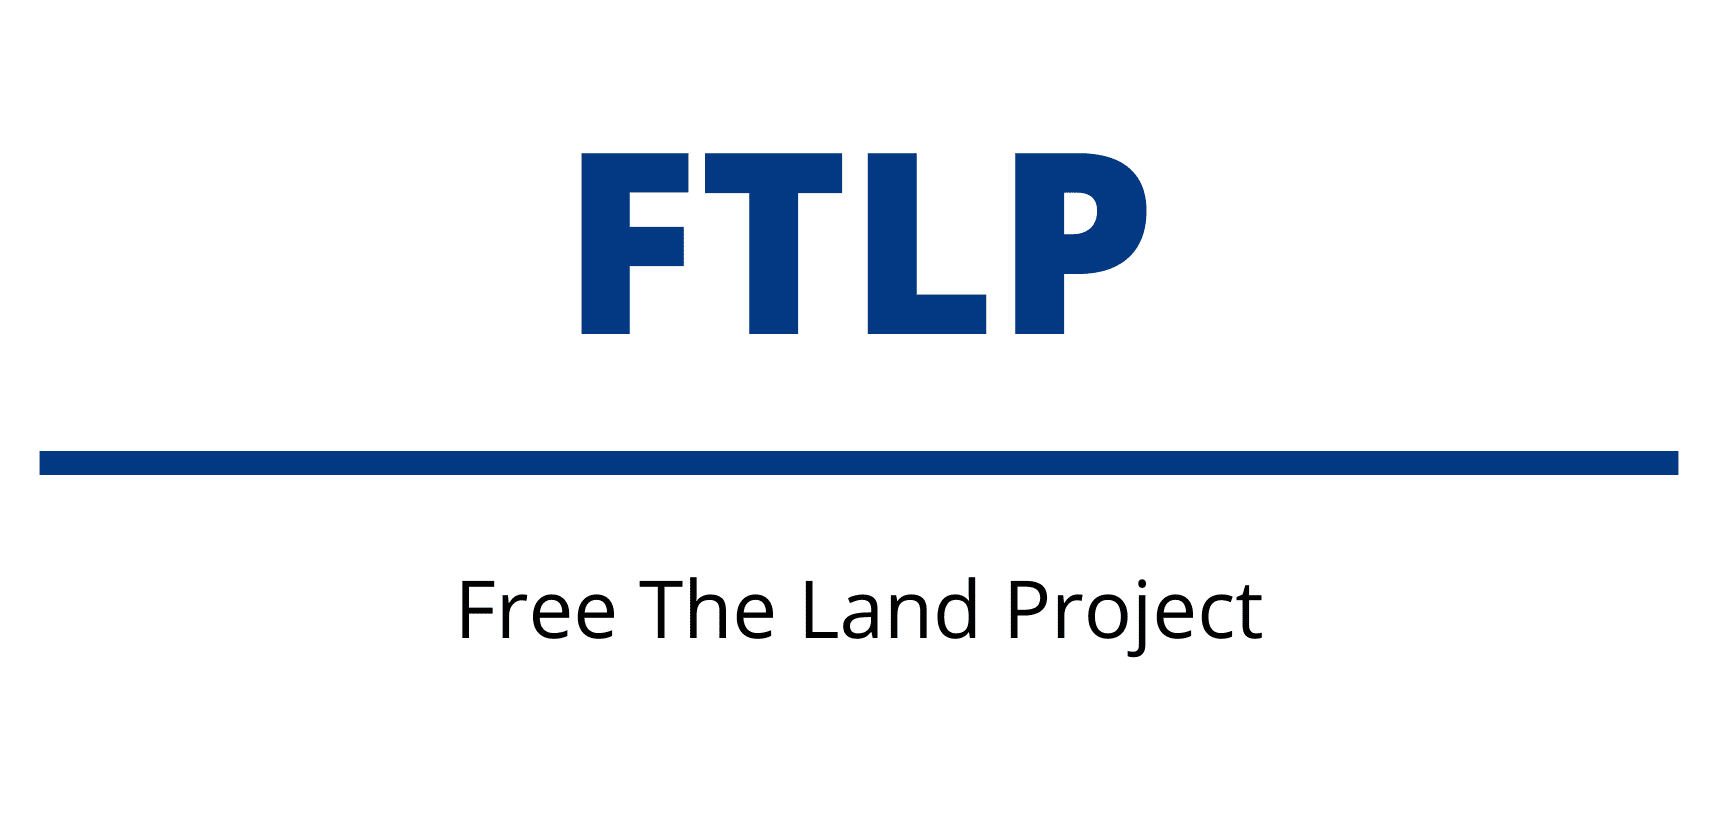 Free The Land Project logo